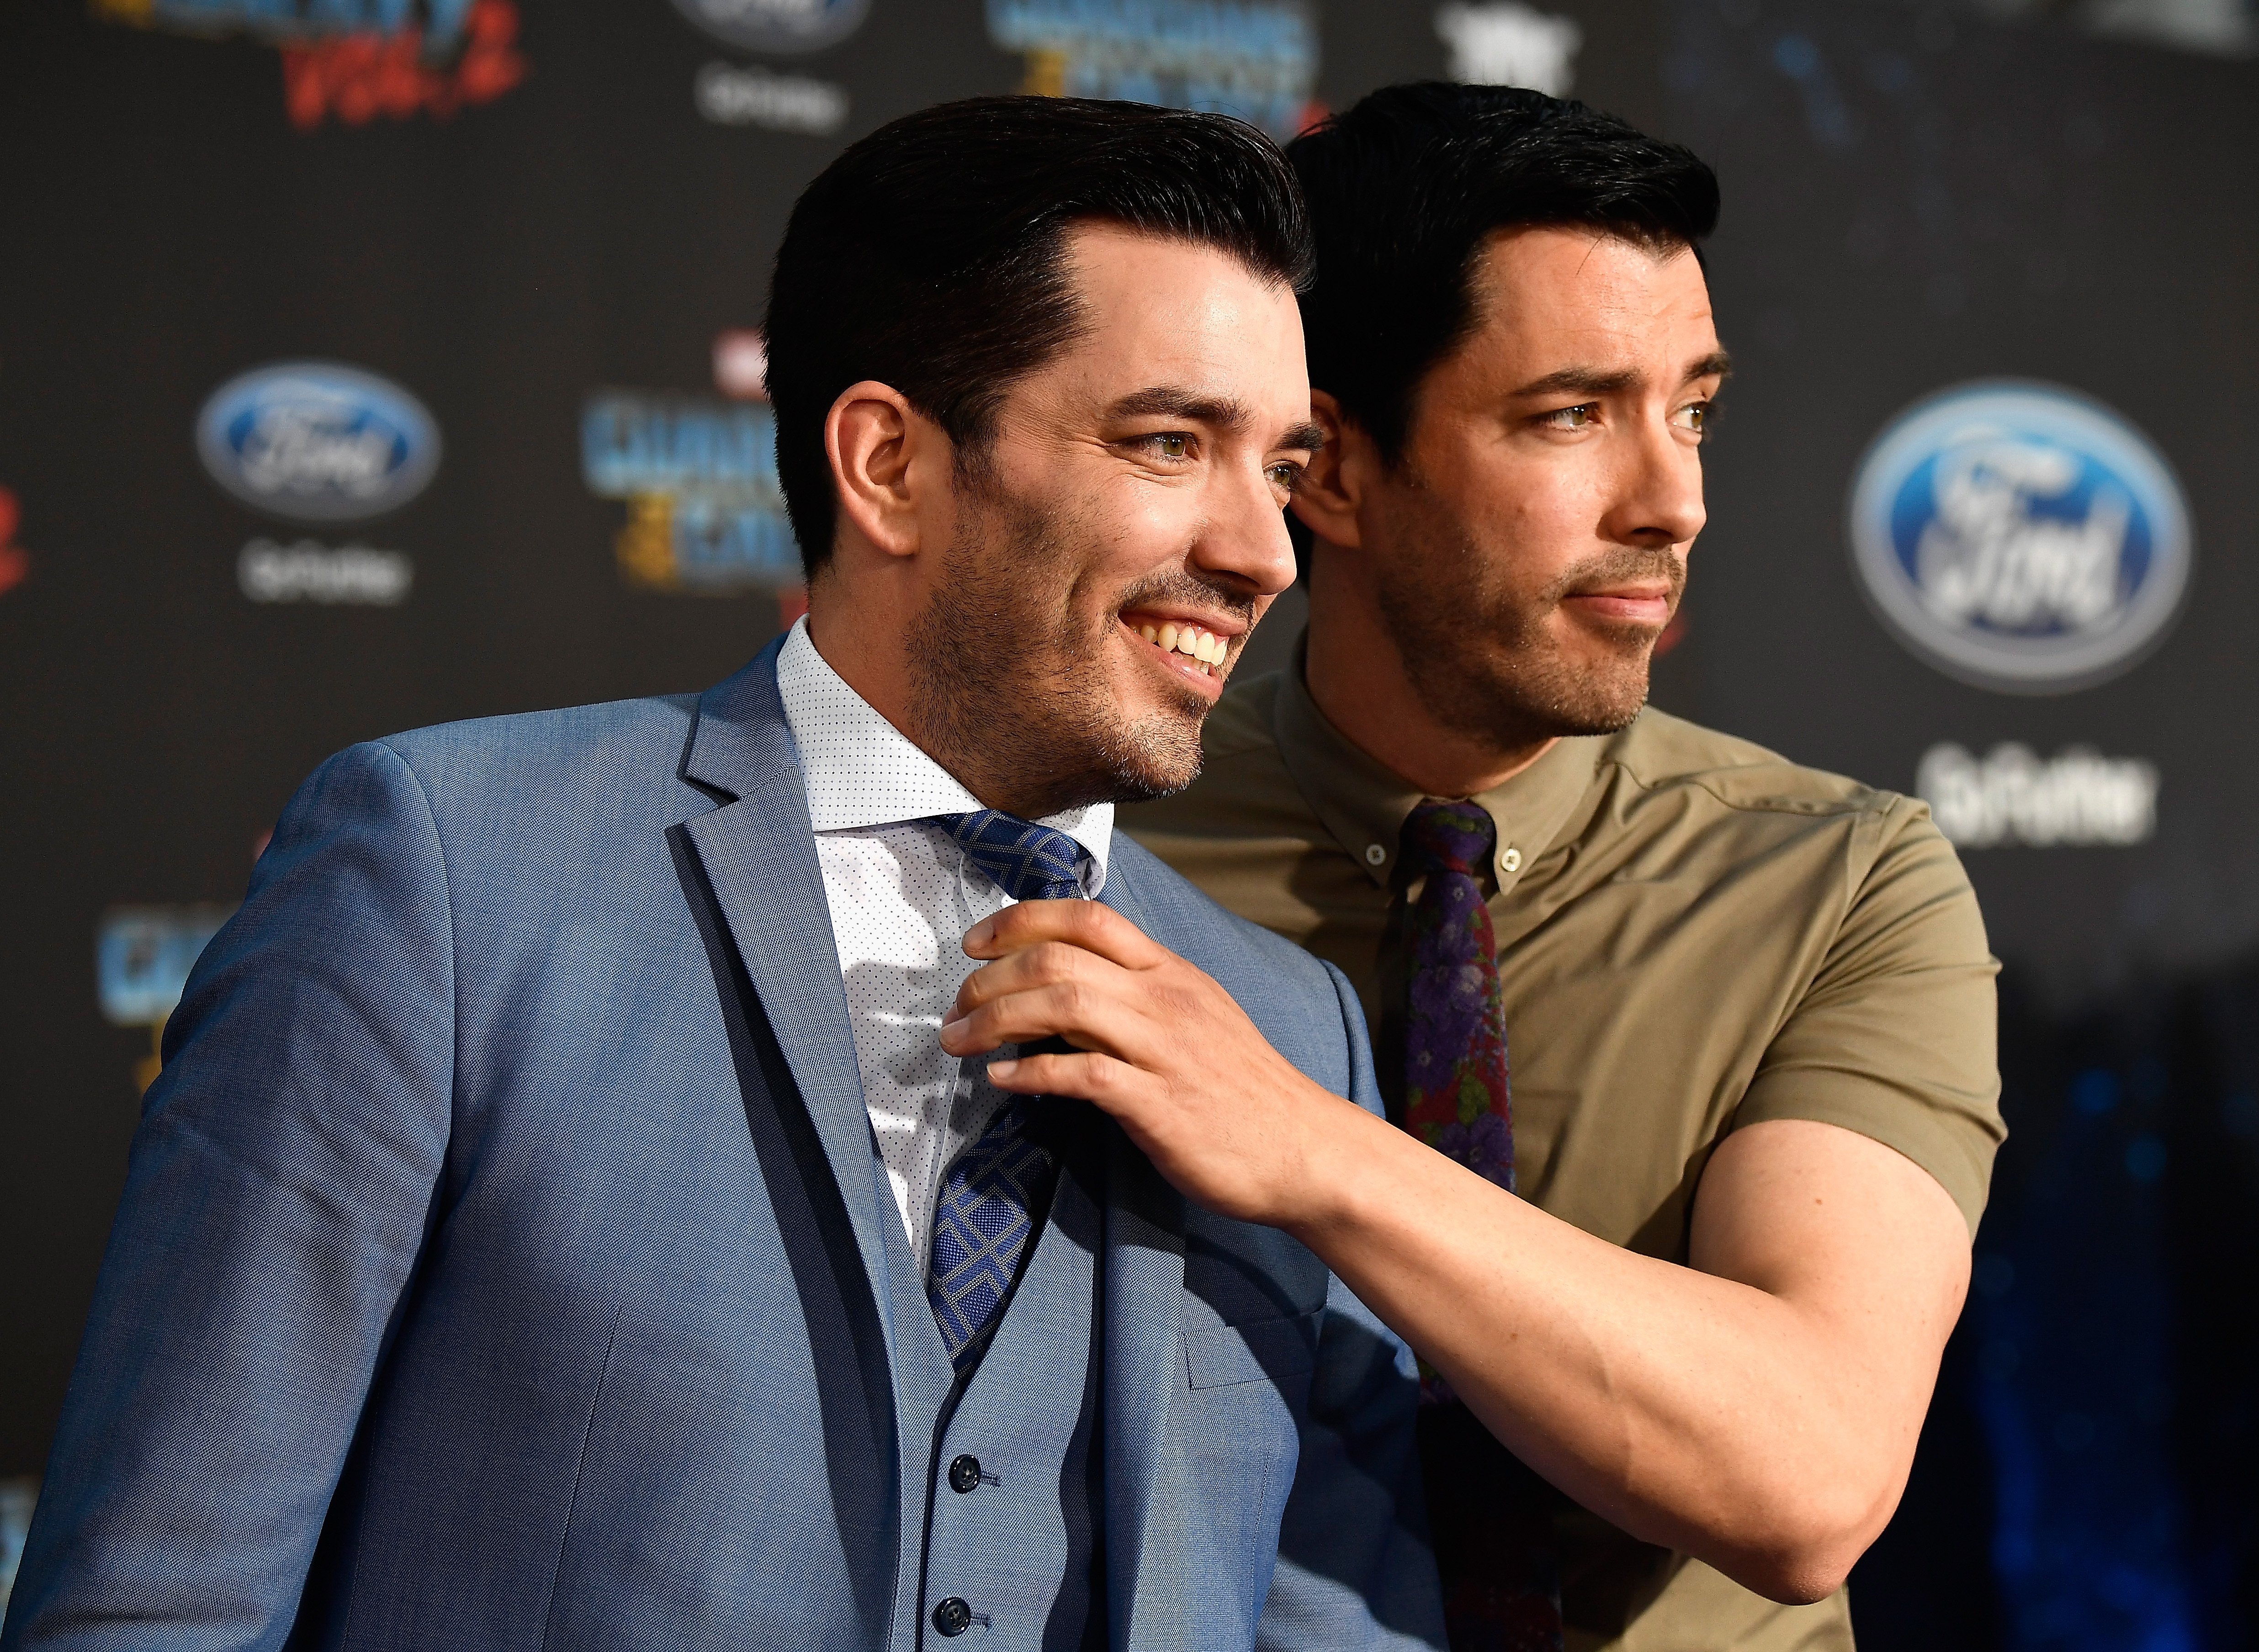 TV personalities Jonathan Scott and Drew Scott at the premiere of Disney and Marvel's "Guardians Of The Galaxy Vol. 2" at Dolby Theater on April 19, 2017 in Hollywood, California | Source: Getty Images